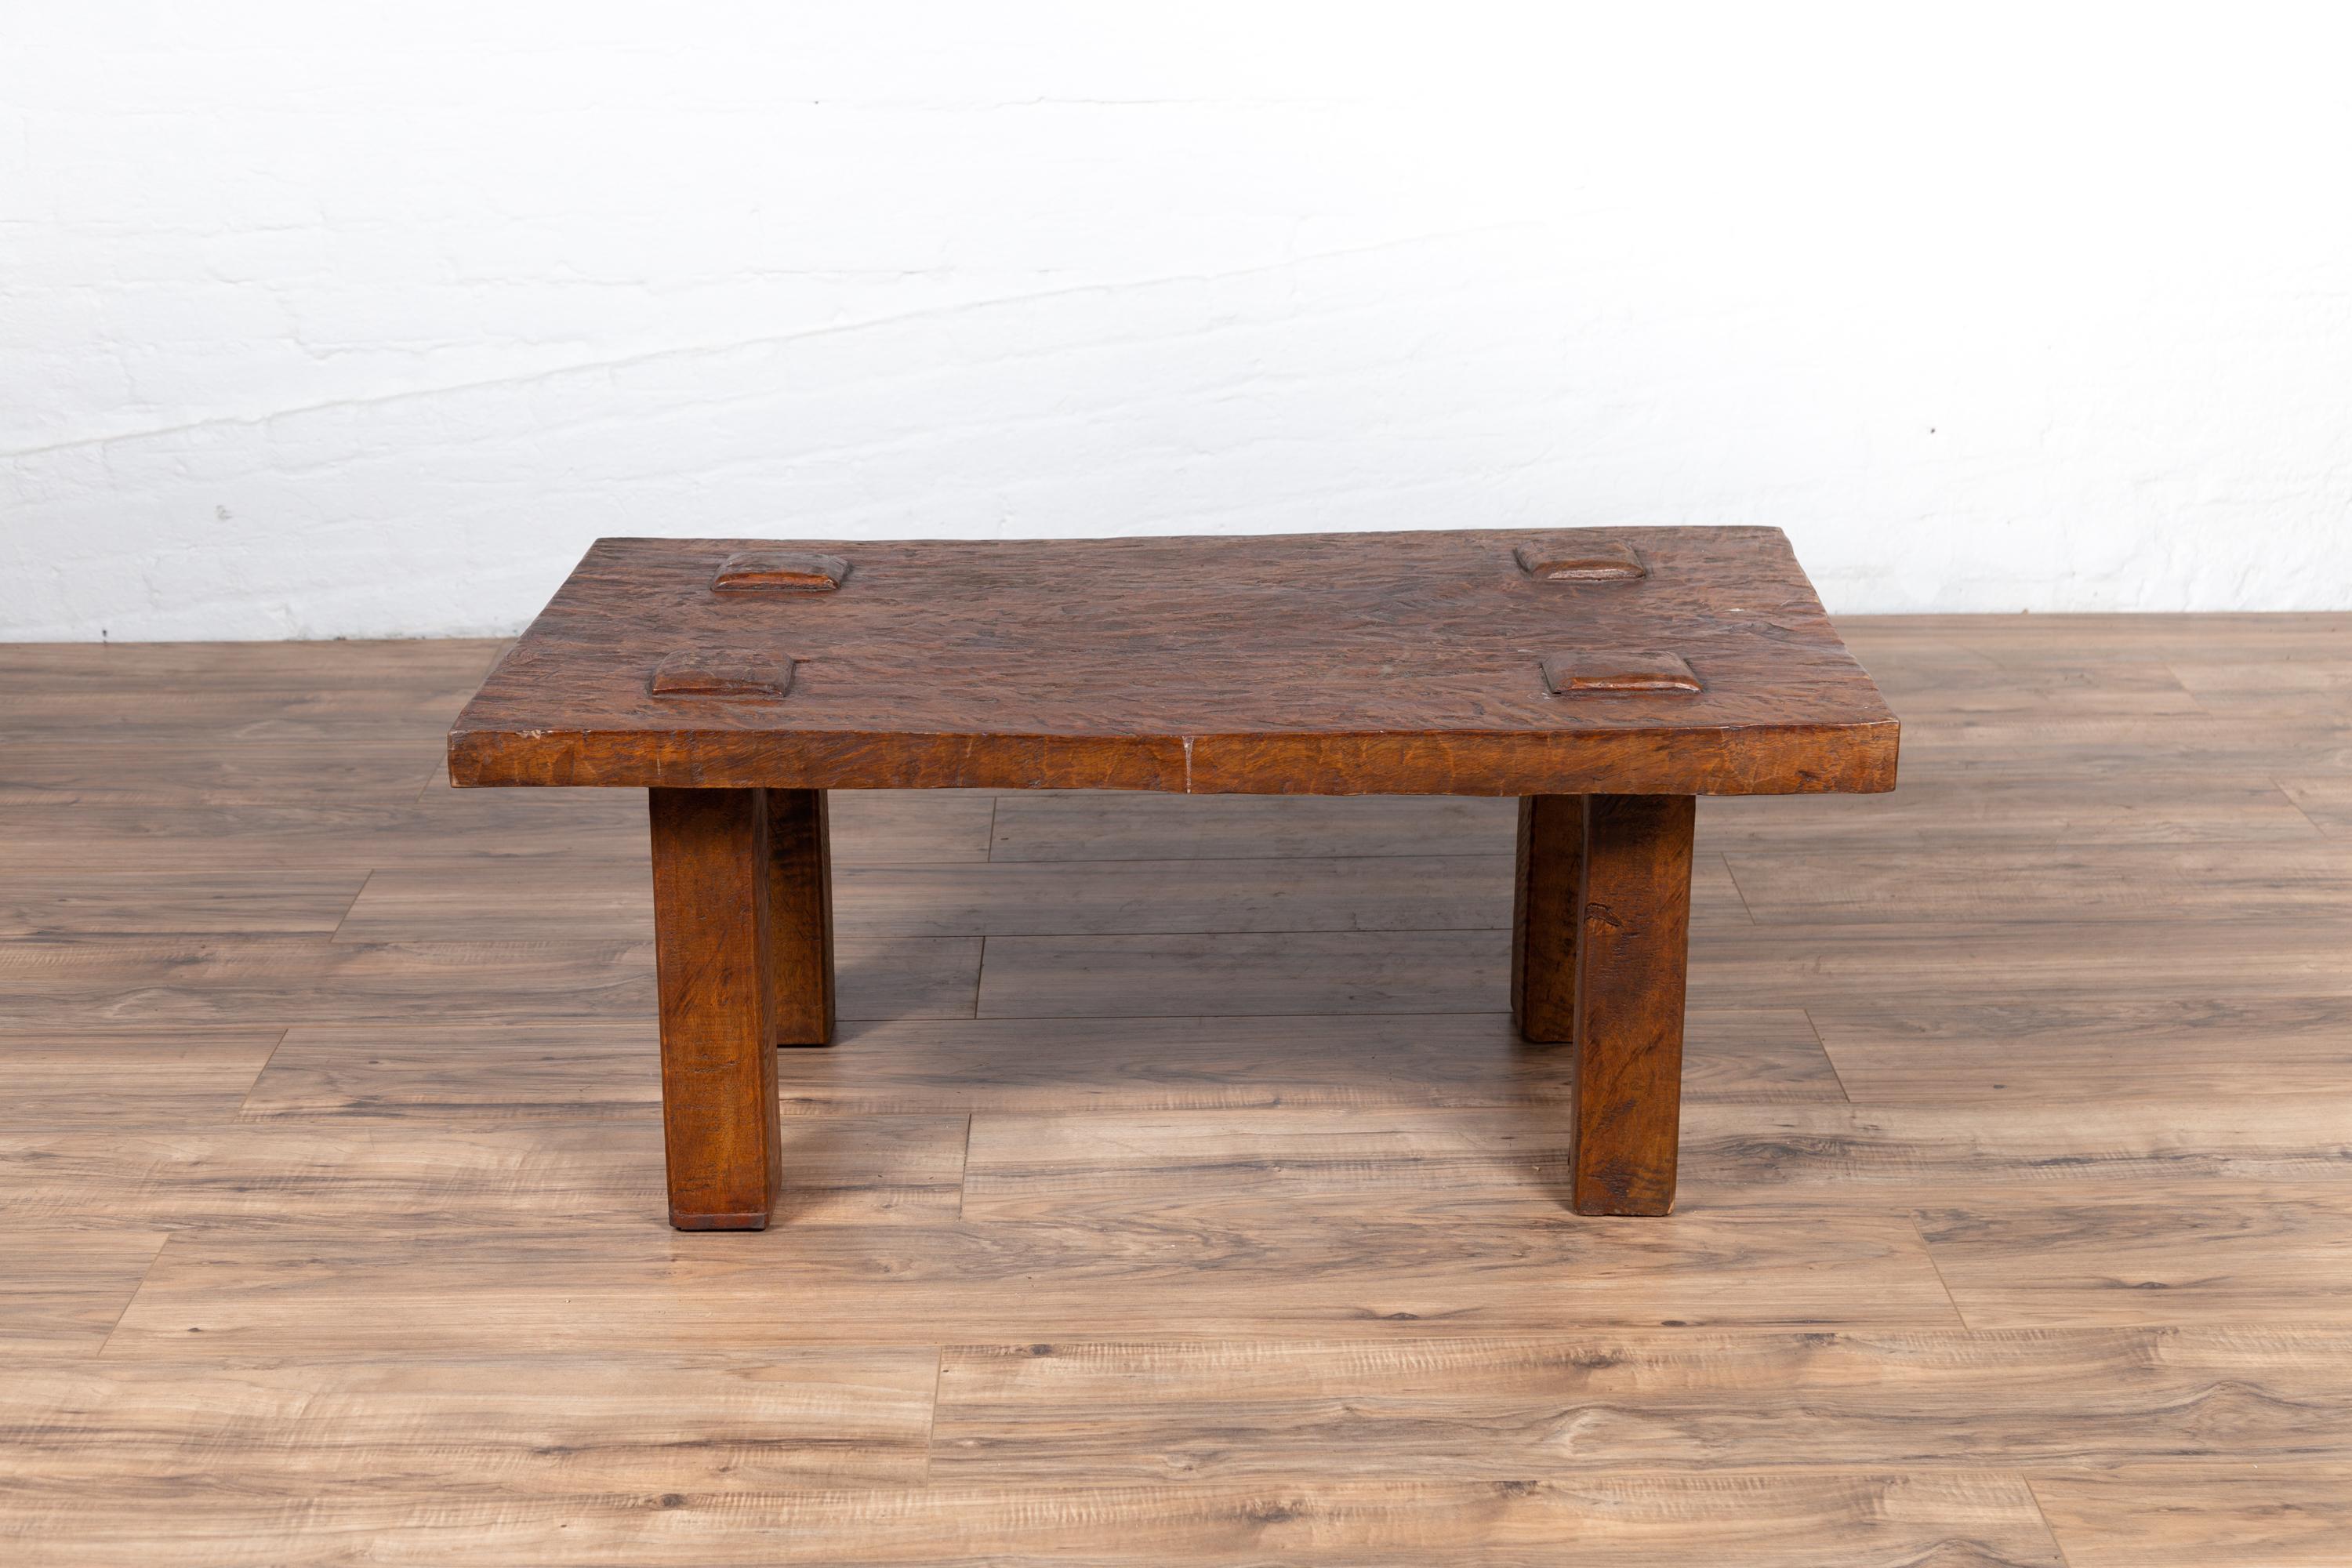 Vintage Indonesian Rustic Wooden Coffee Table with Square Legs and Raised Joints 3